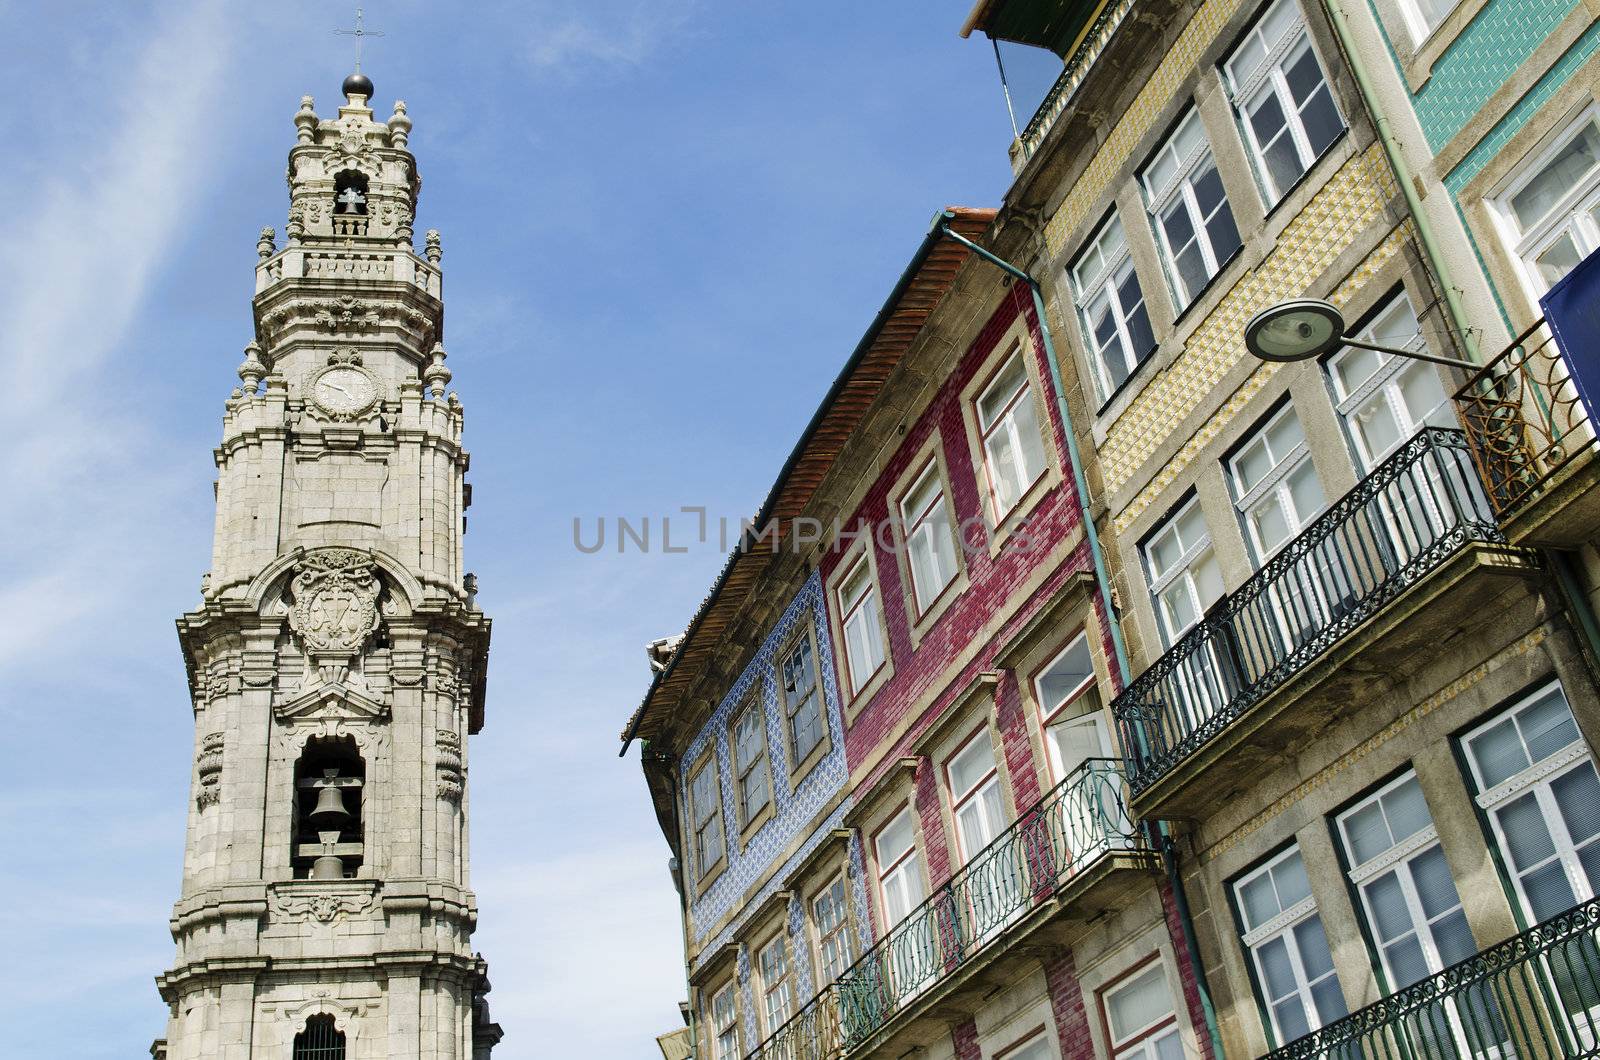 clerigos tower in porto  portugal by jackmalipan